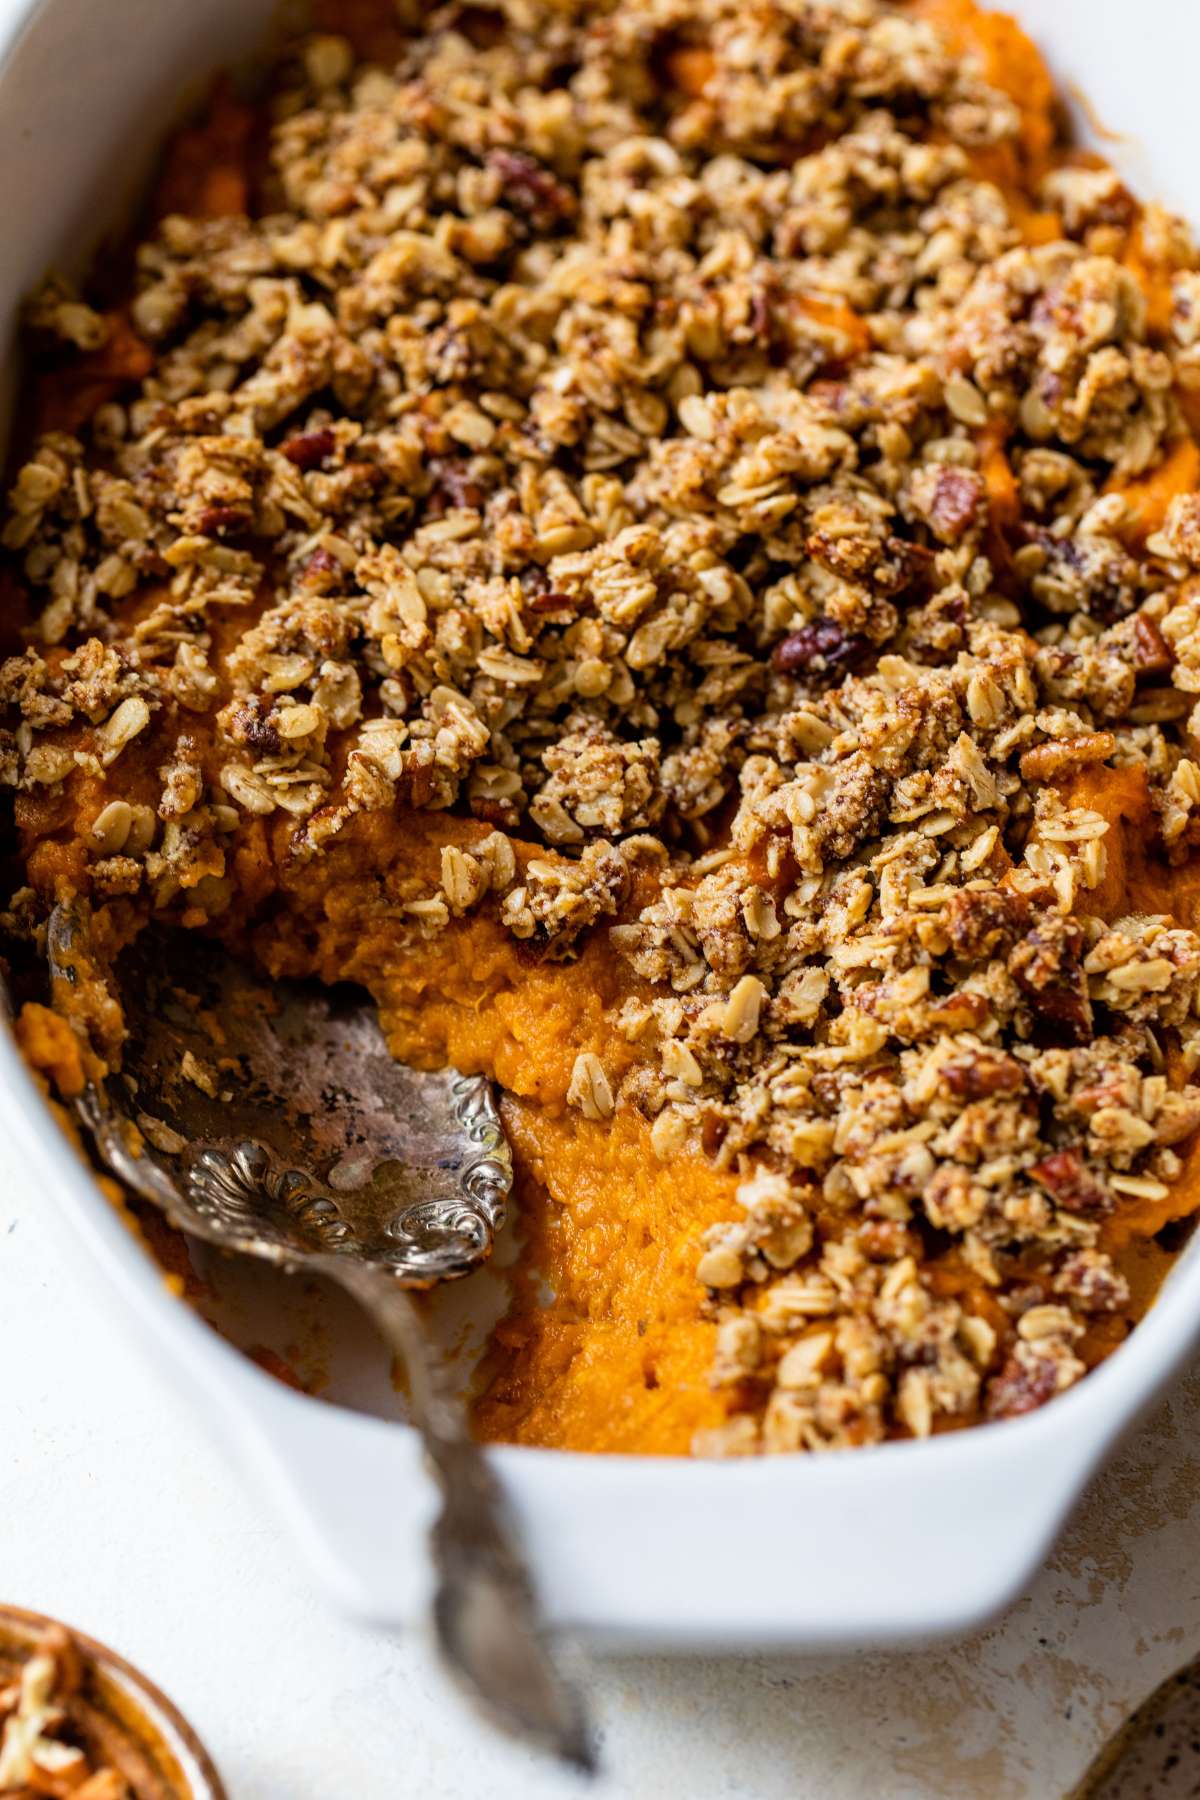 Spooning out a serving of sweet potato casserole.